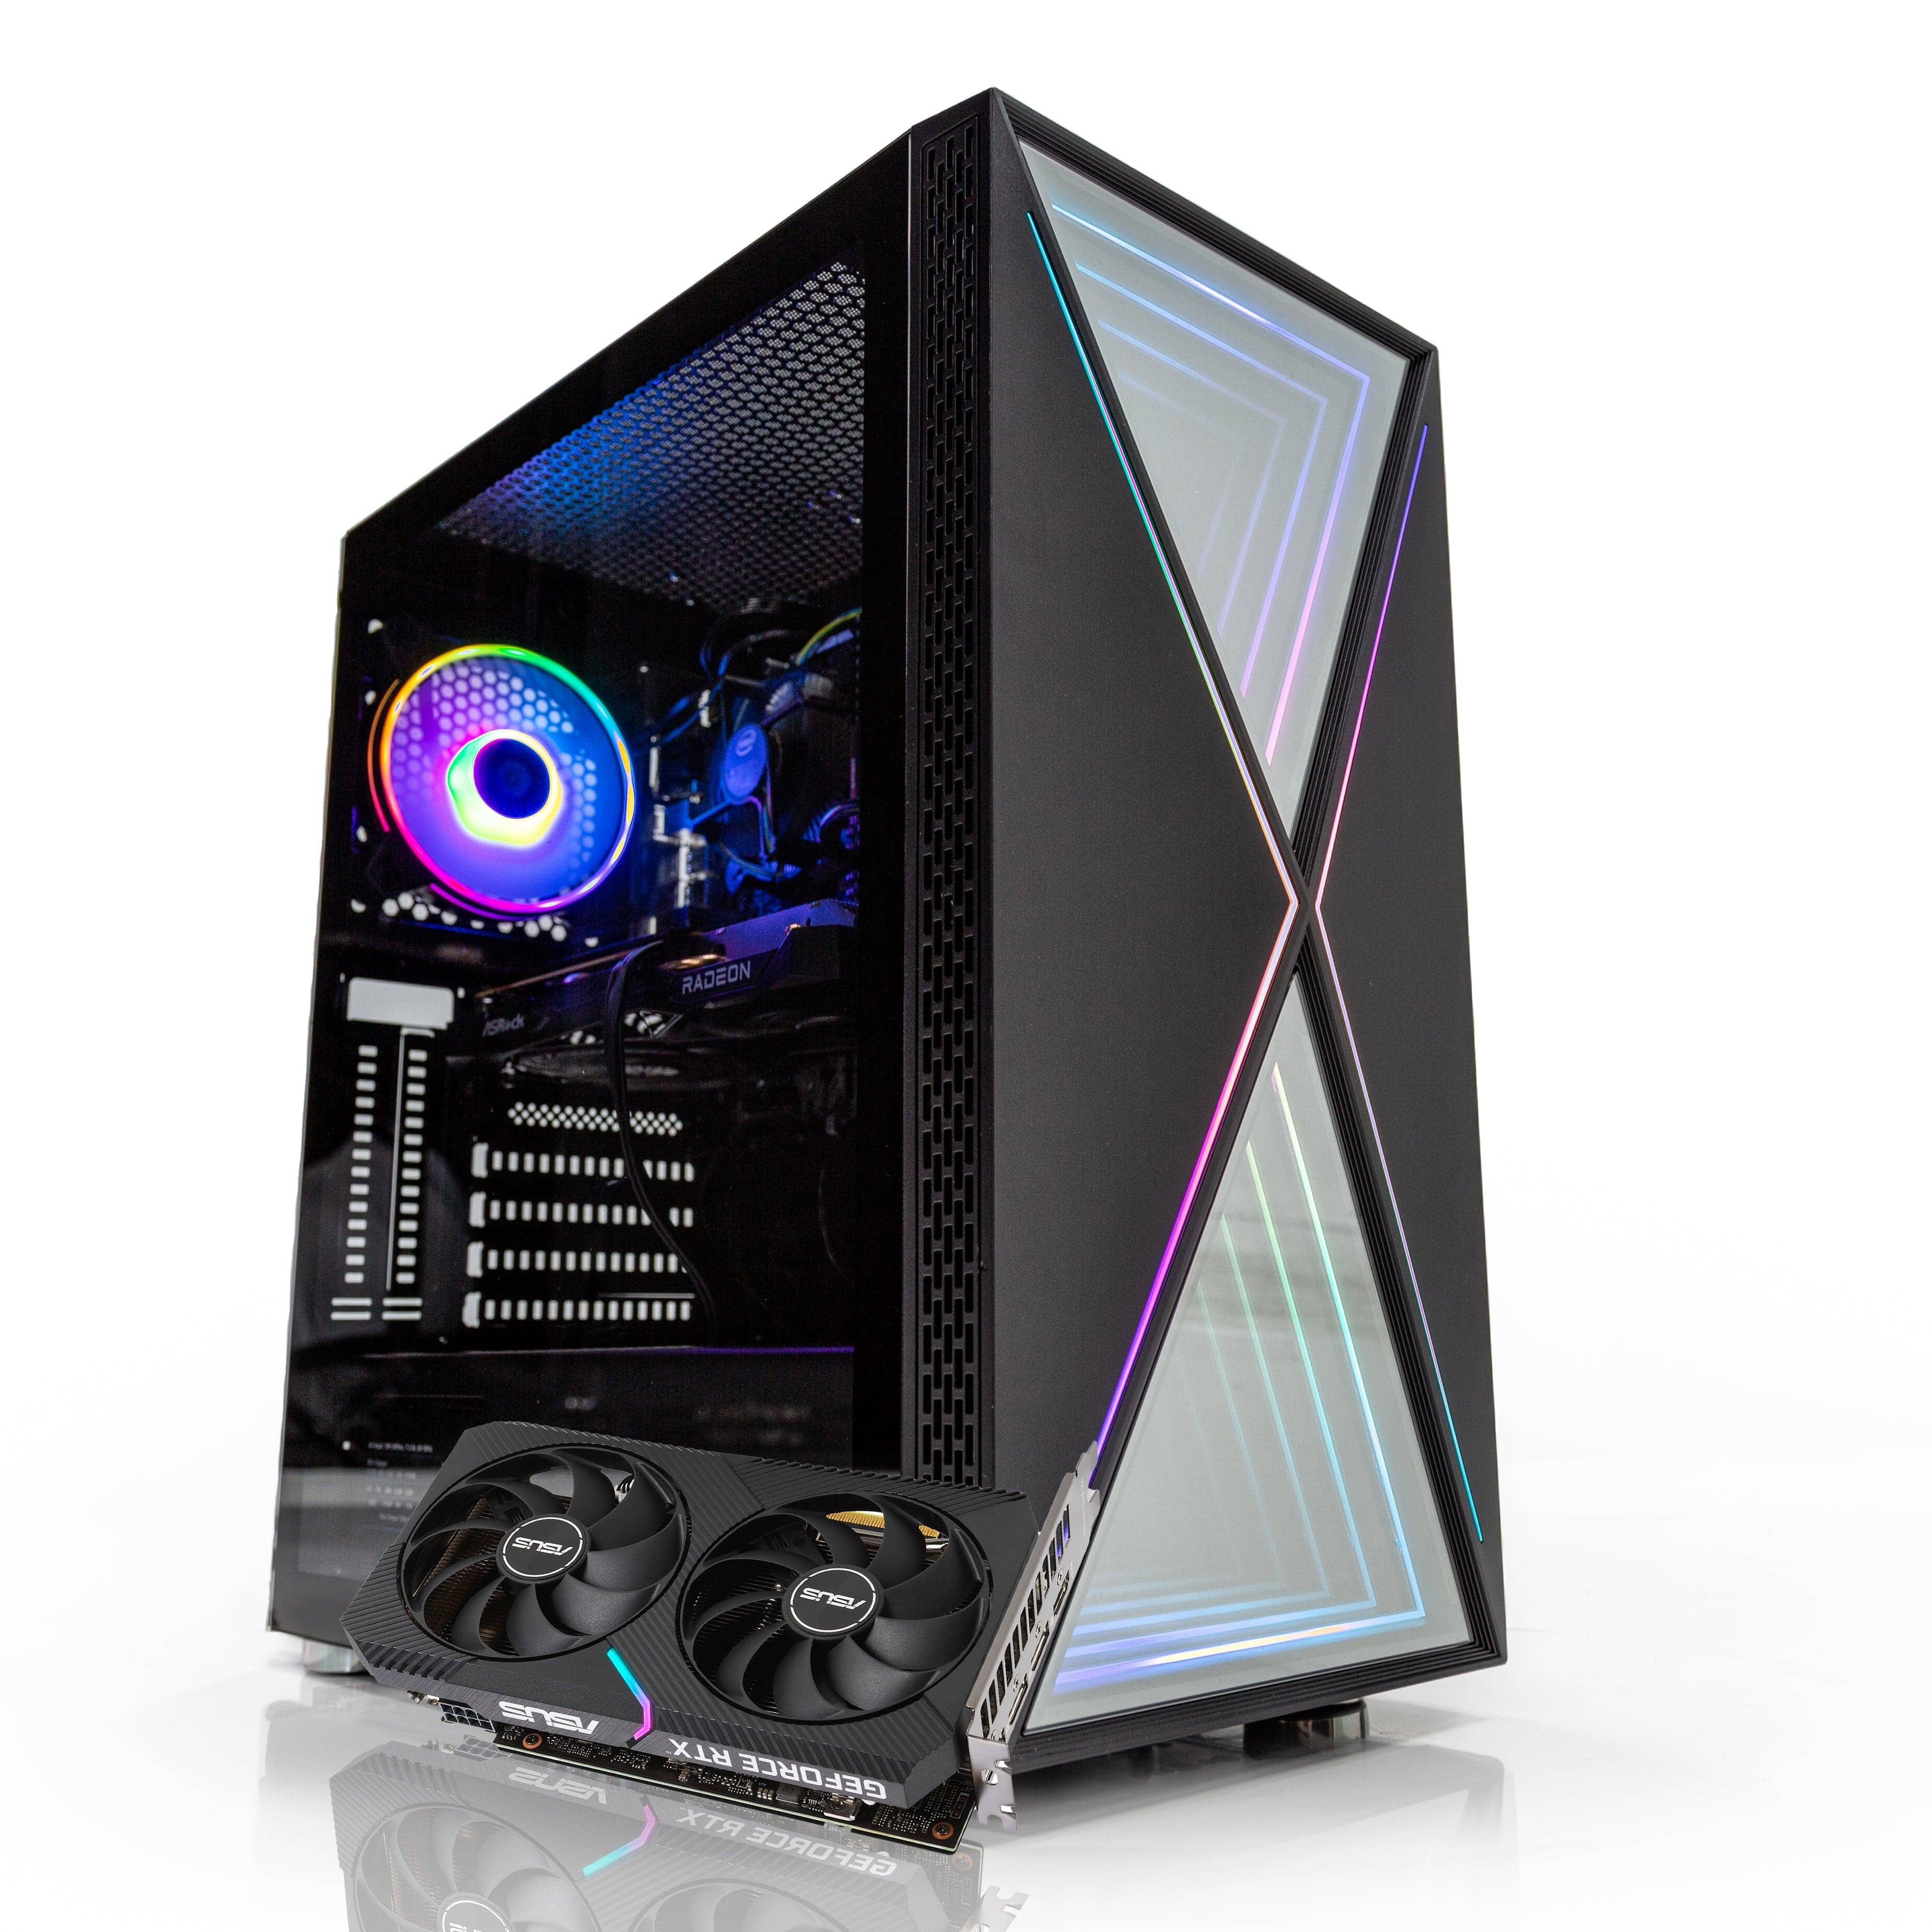 Void X Gaming PC Core i7 6700, 16GB Ram, 240GB SSD + 1TB HDD, RTX 2060  Desktop PC for Streaming & Gaming, AWGAMING